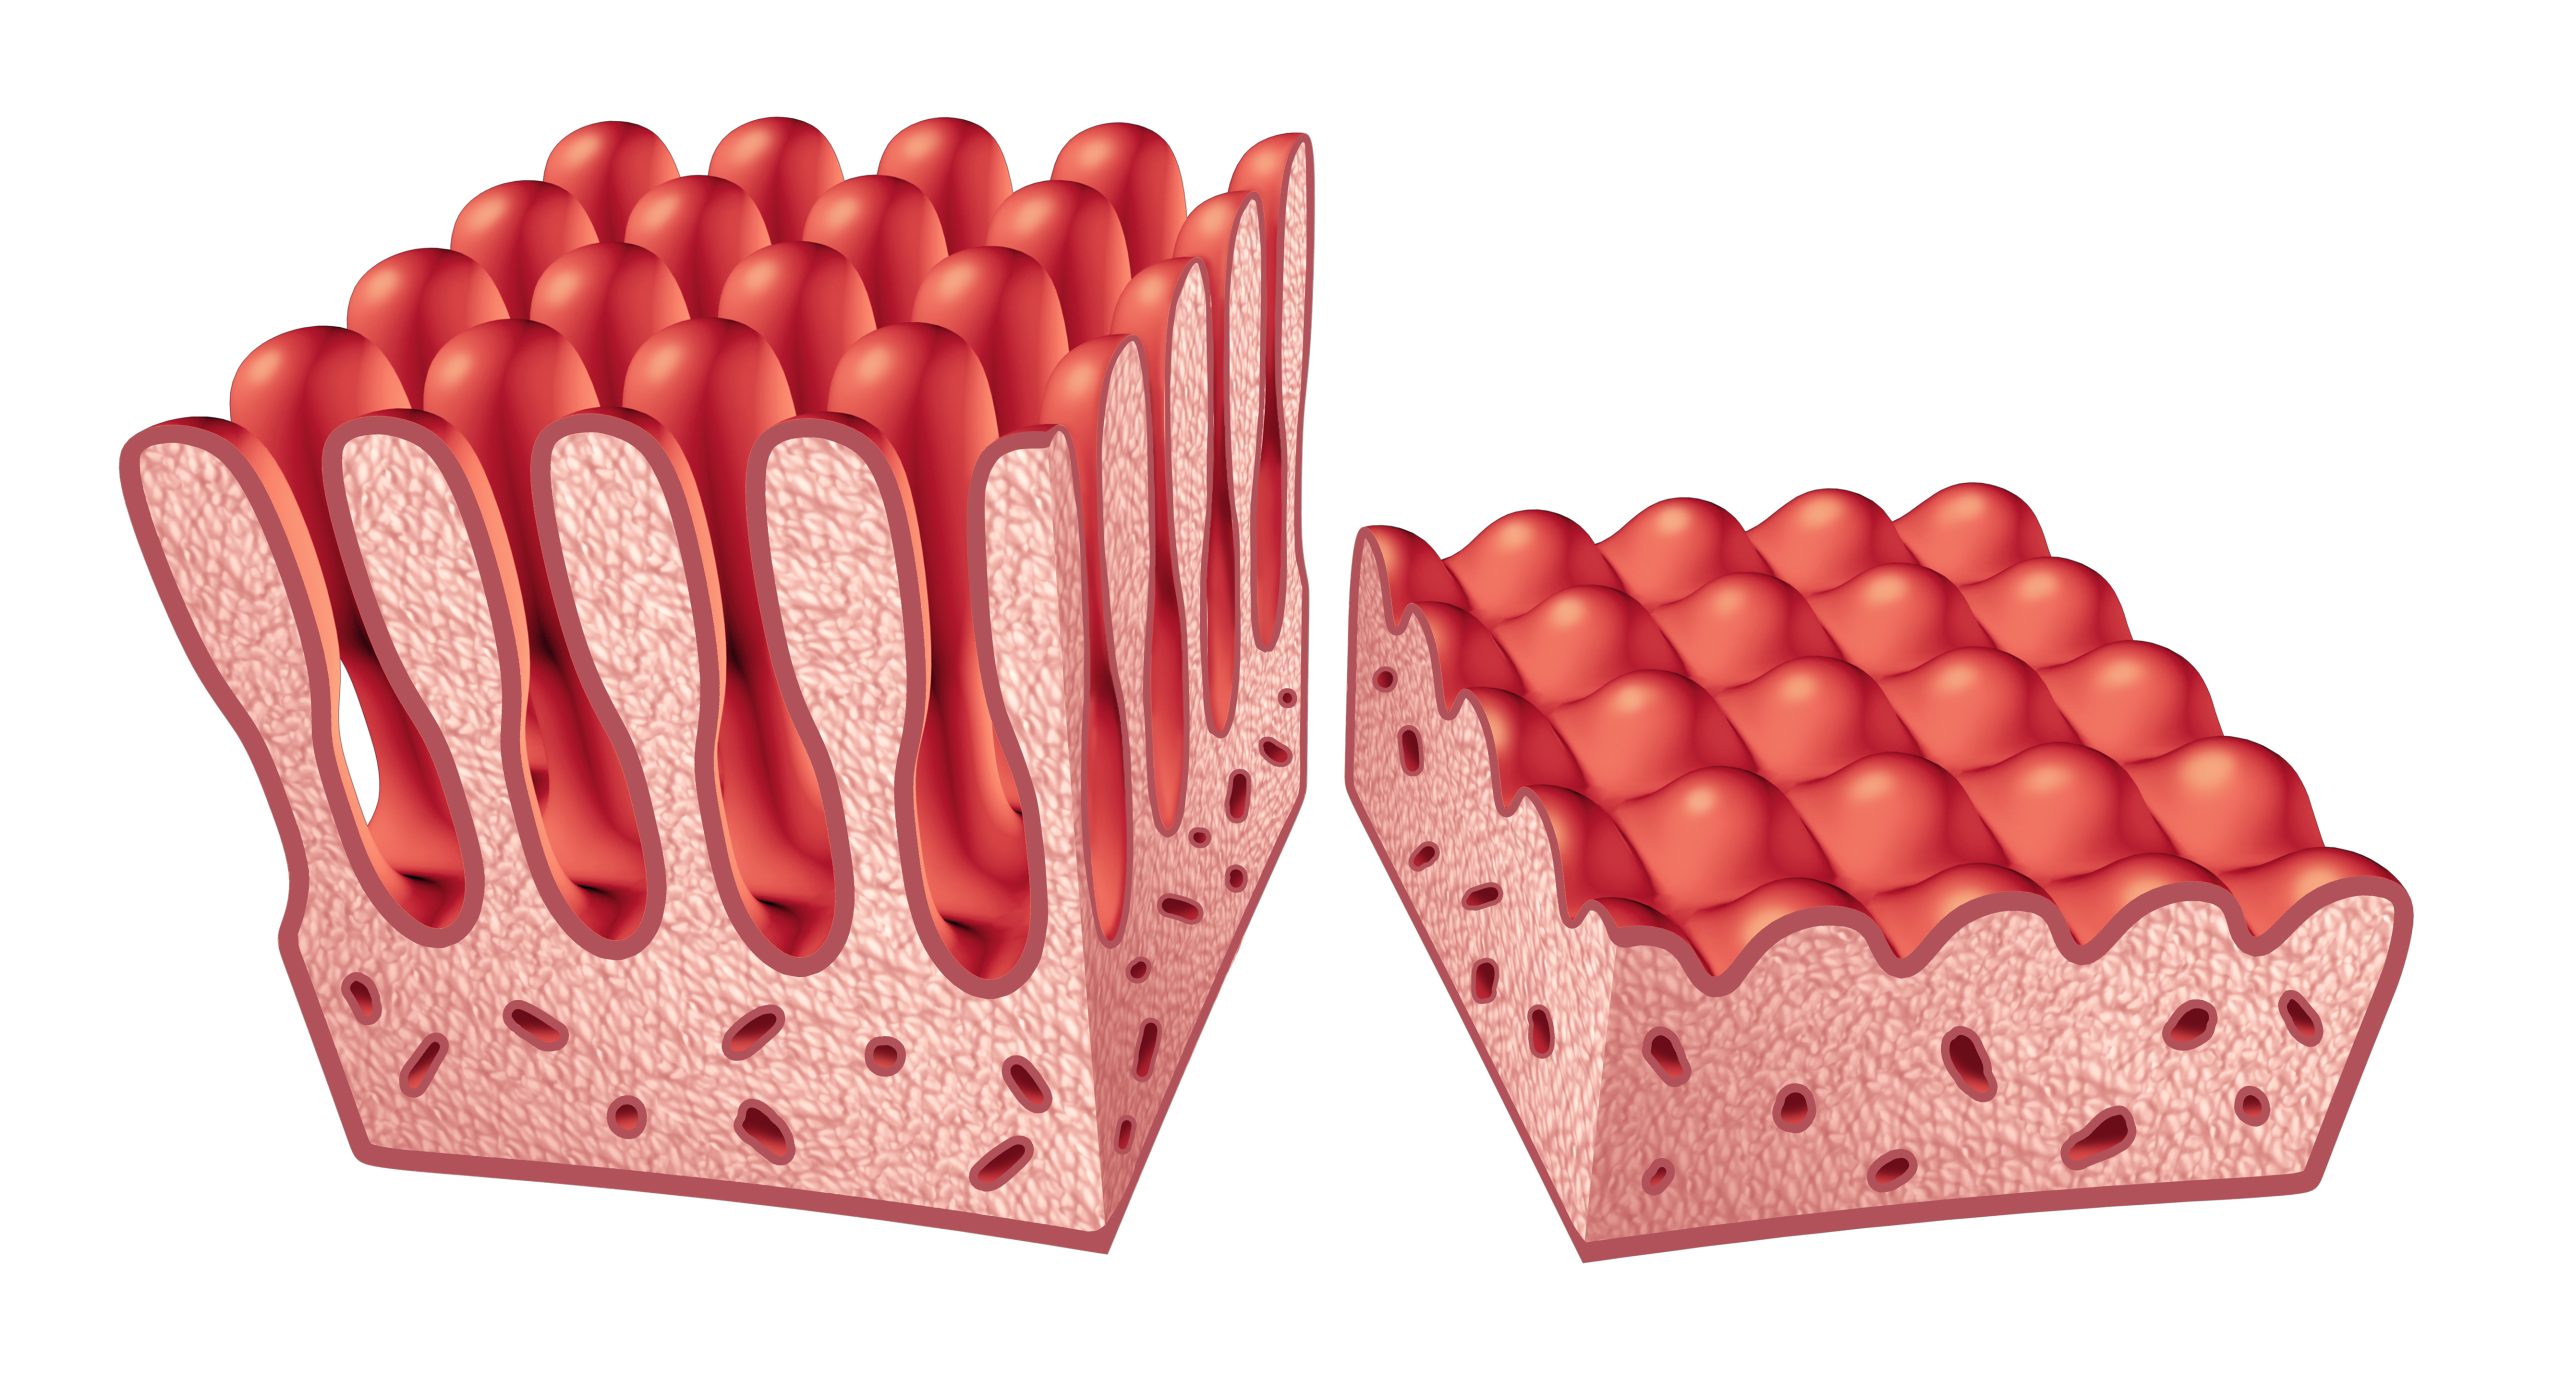 A 3D illustration showing normal (healthy) villi on the left and damaged villi (coeliac disease) on the right.